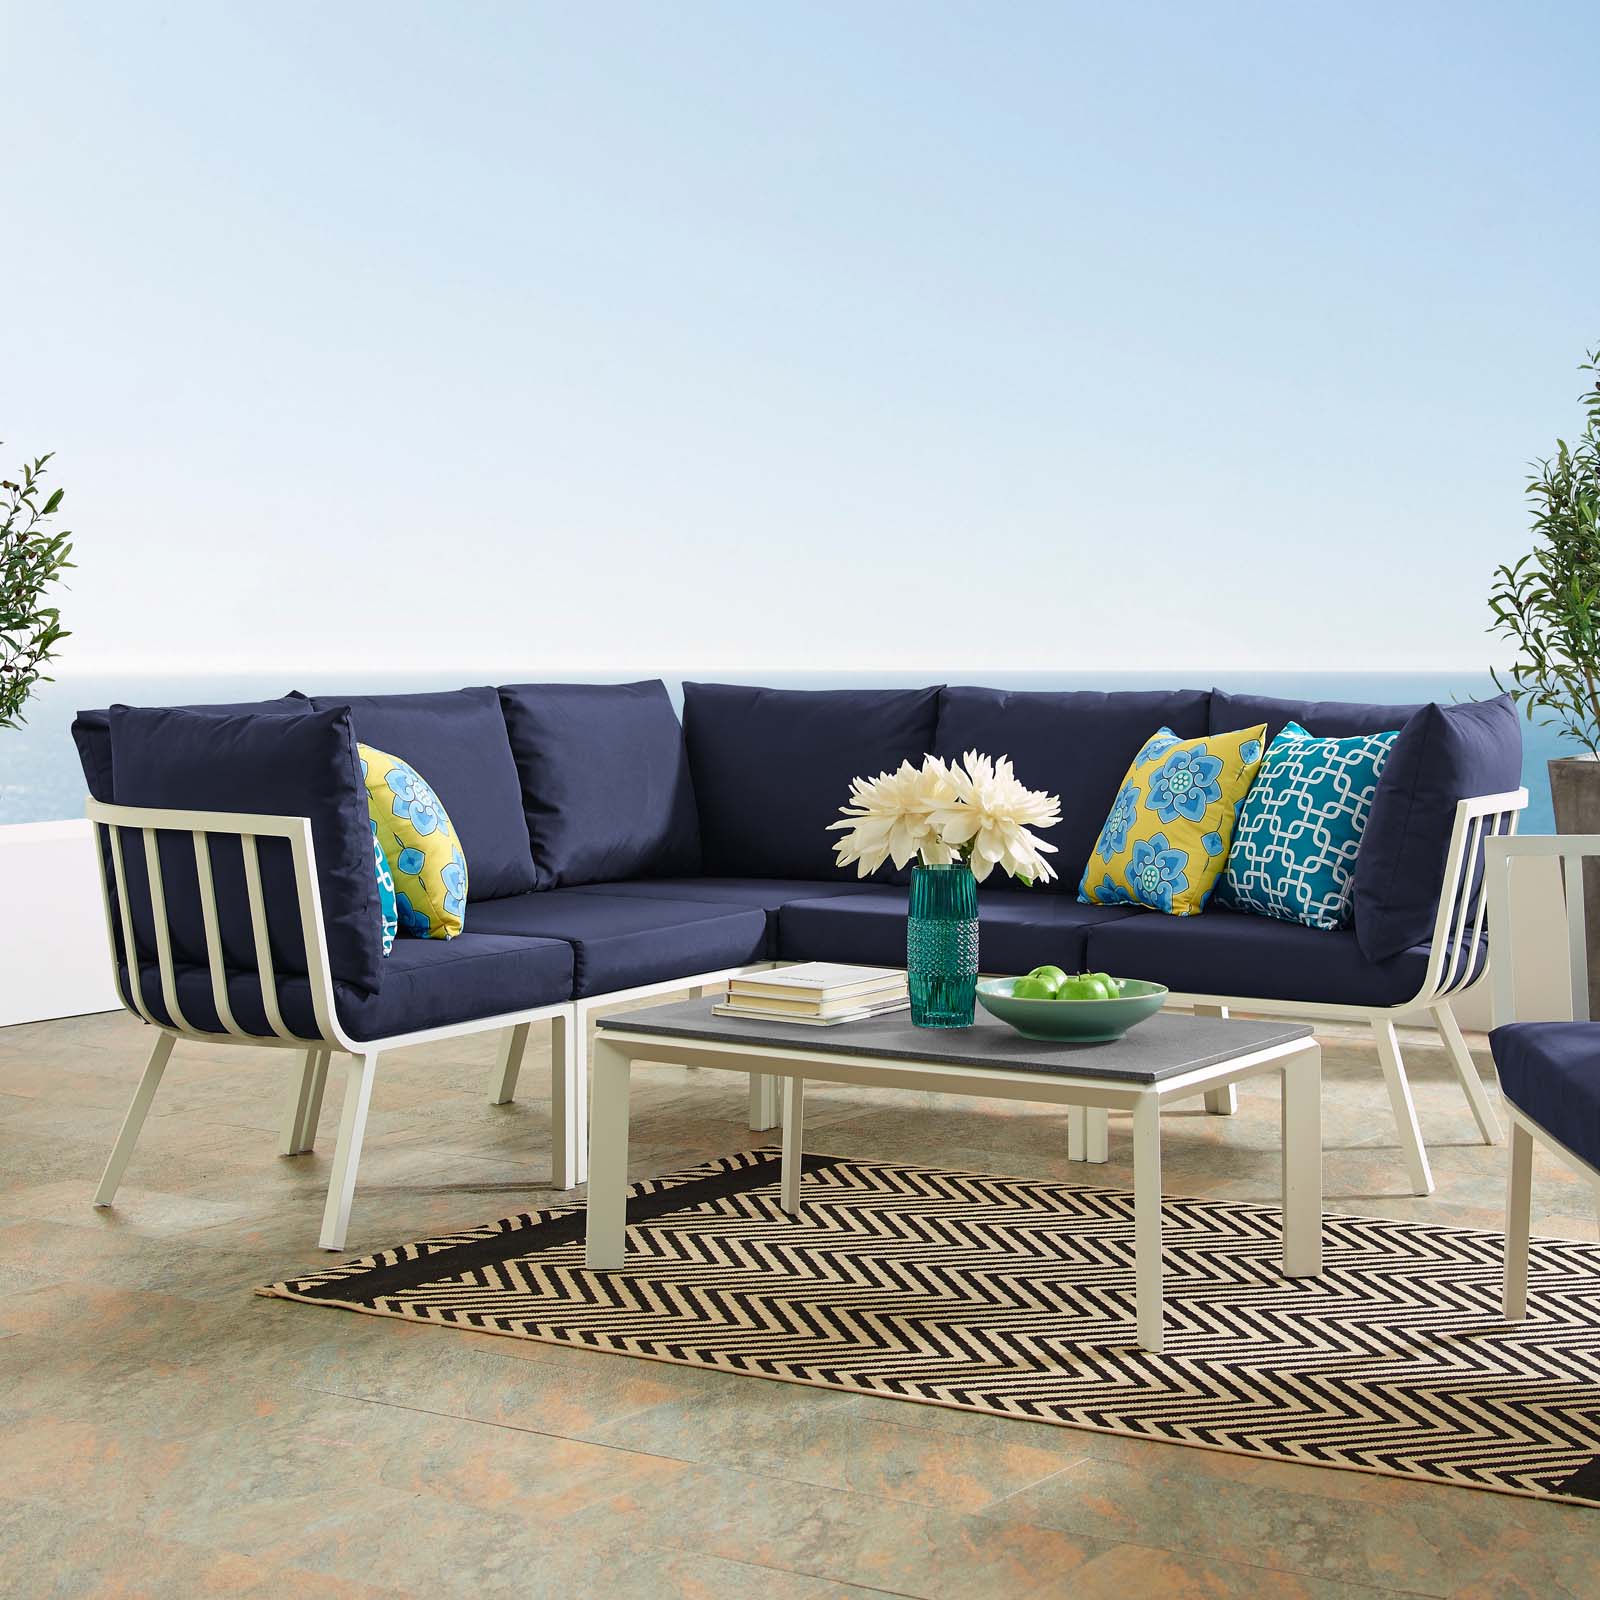 Lounge Sectional Sofa Chair Set, Aluminum, Metal, Steel, White Blue Navy, Modern Contemporary Urban Design, Outdoor Patio Balcony Cafe Bistro Garden Furniture Hotel Hospitality - image 2 of 10